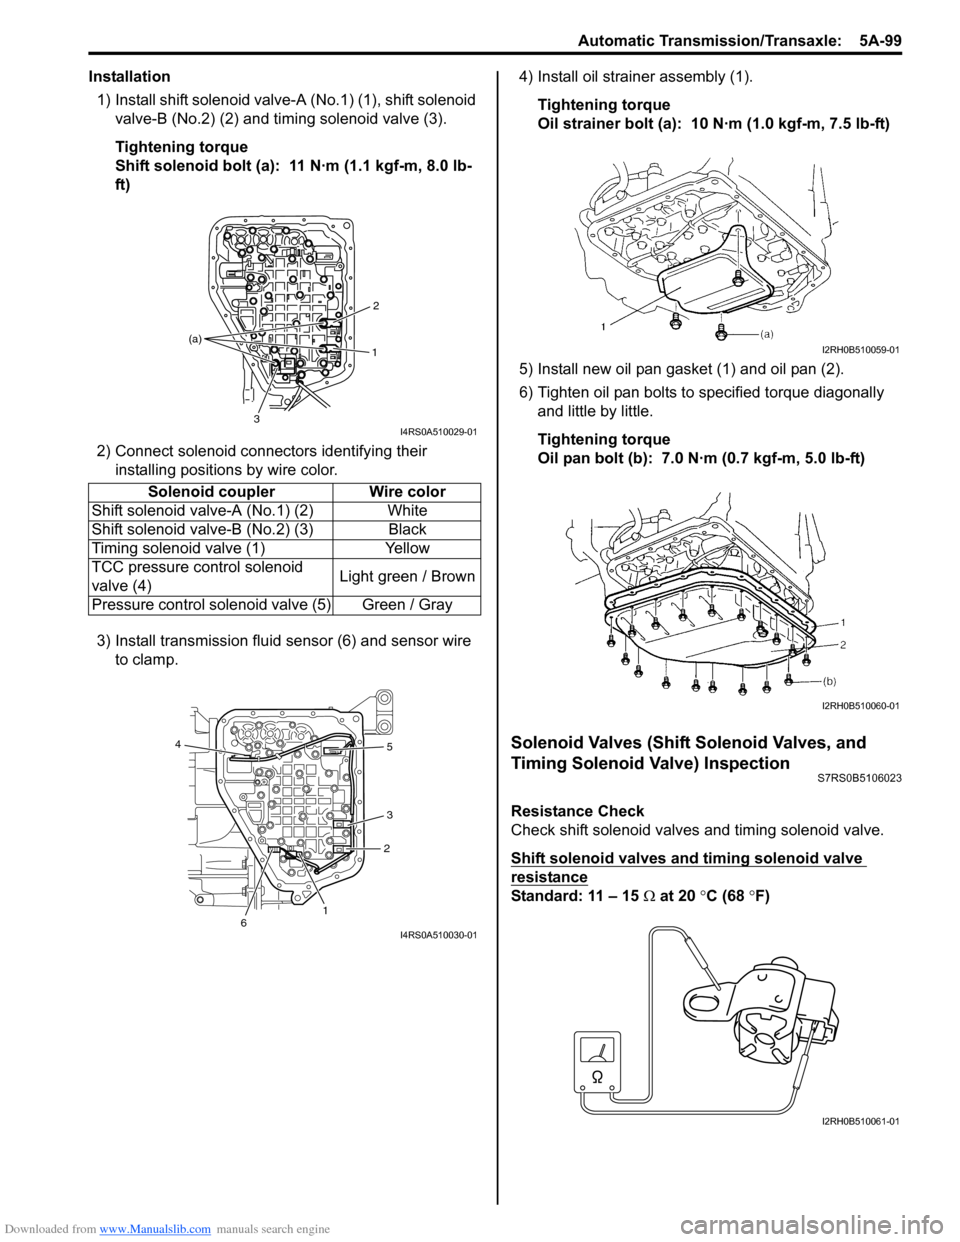 SUZUKI SWIFT 2007 2.G Service Workshop Manual Downloaded from www.Manualslib.com manuals search engine Automatic Transmission/Transaxle:  5A-99
Installation1) Install shift solenoid valve- A (No.1) (1), shift solenoid 
valve-B (No.2) (2) and timi